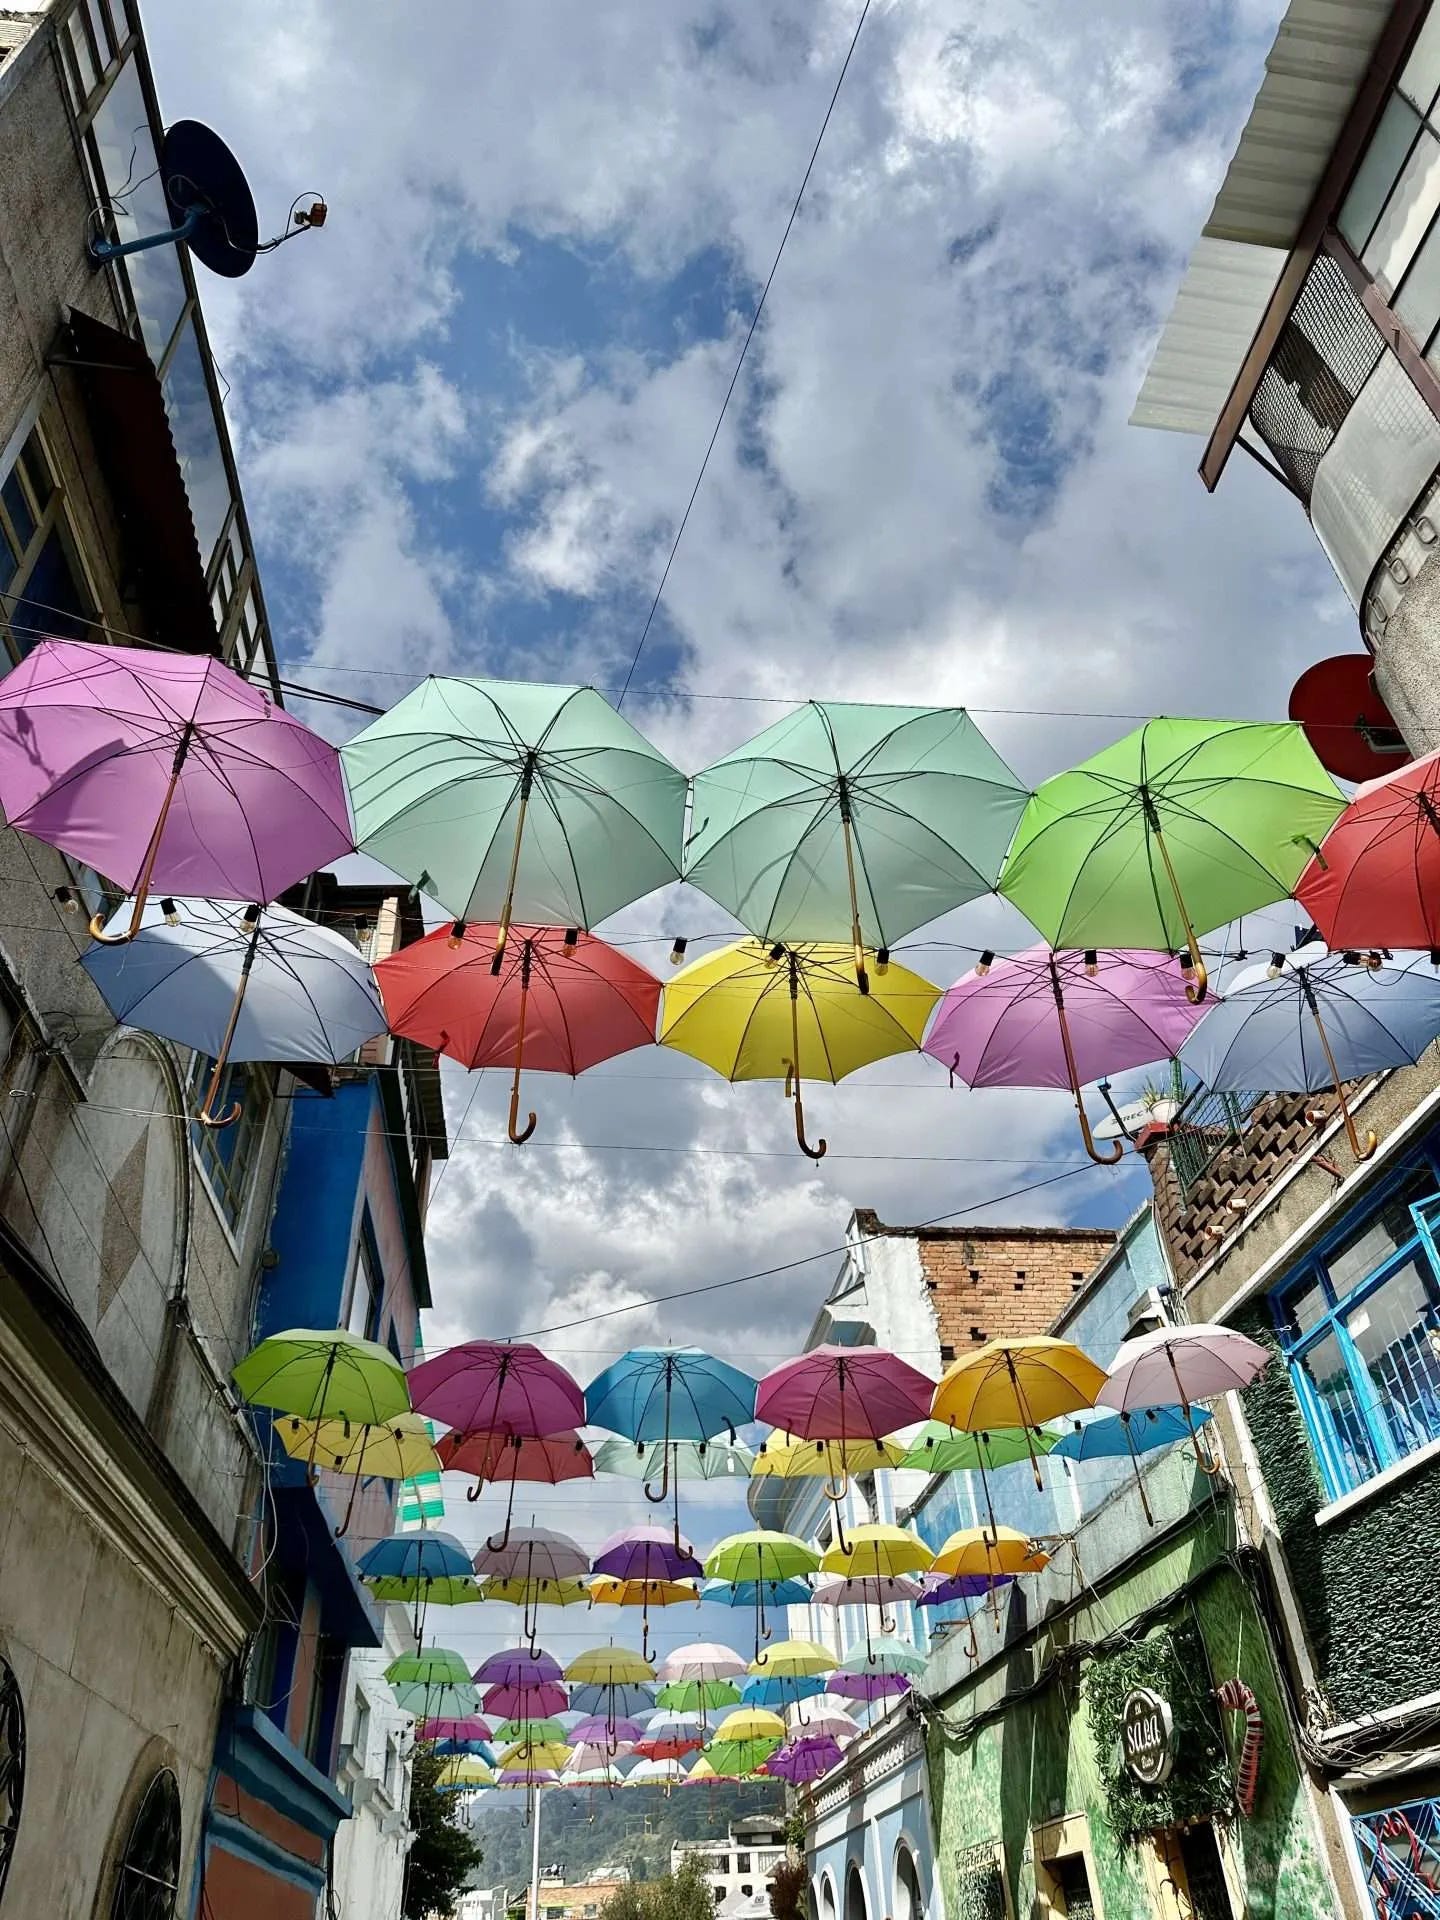 Colorful umbrellas hang suspended over a narrow street between buildings, with a partly cloudy sky in the background, capturing the whimsical essence of full-time travel.